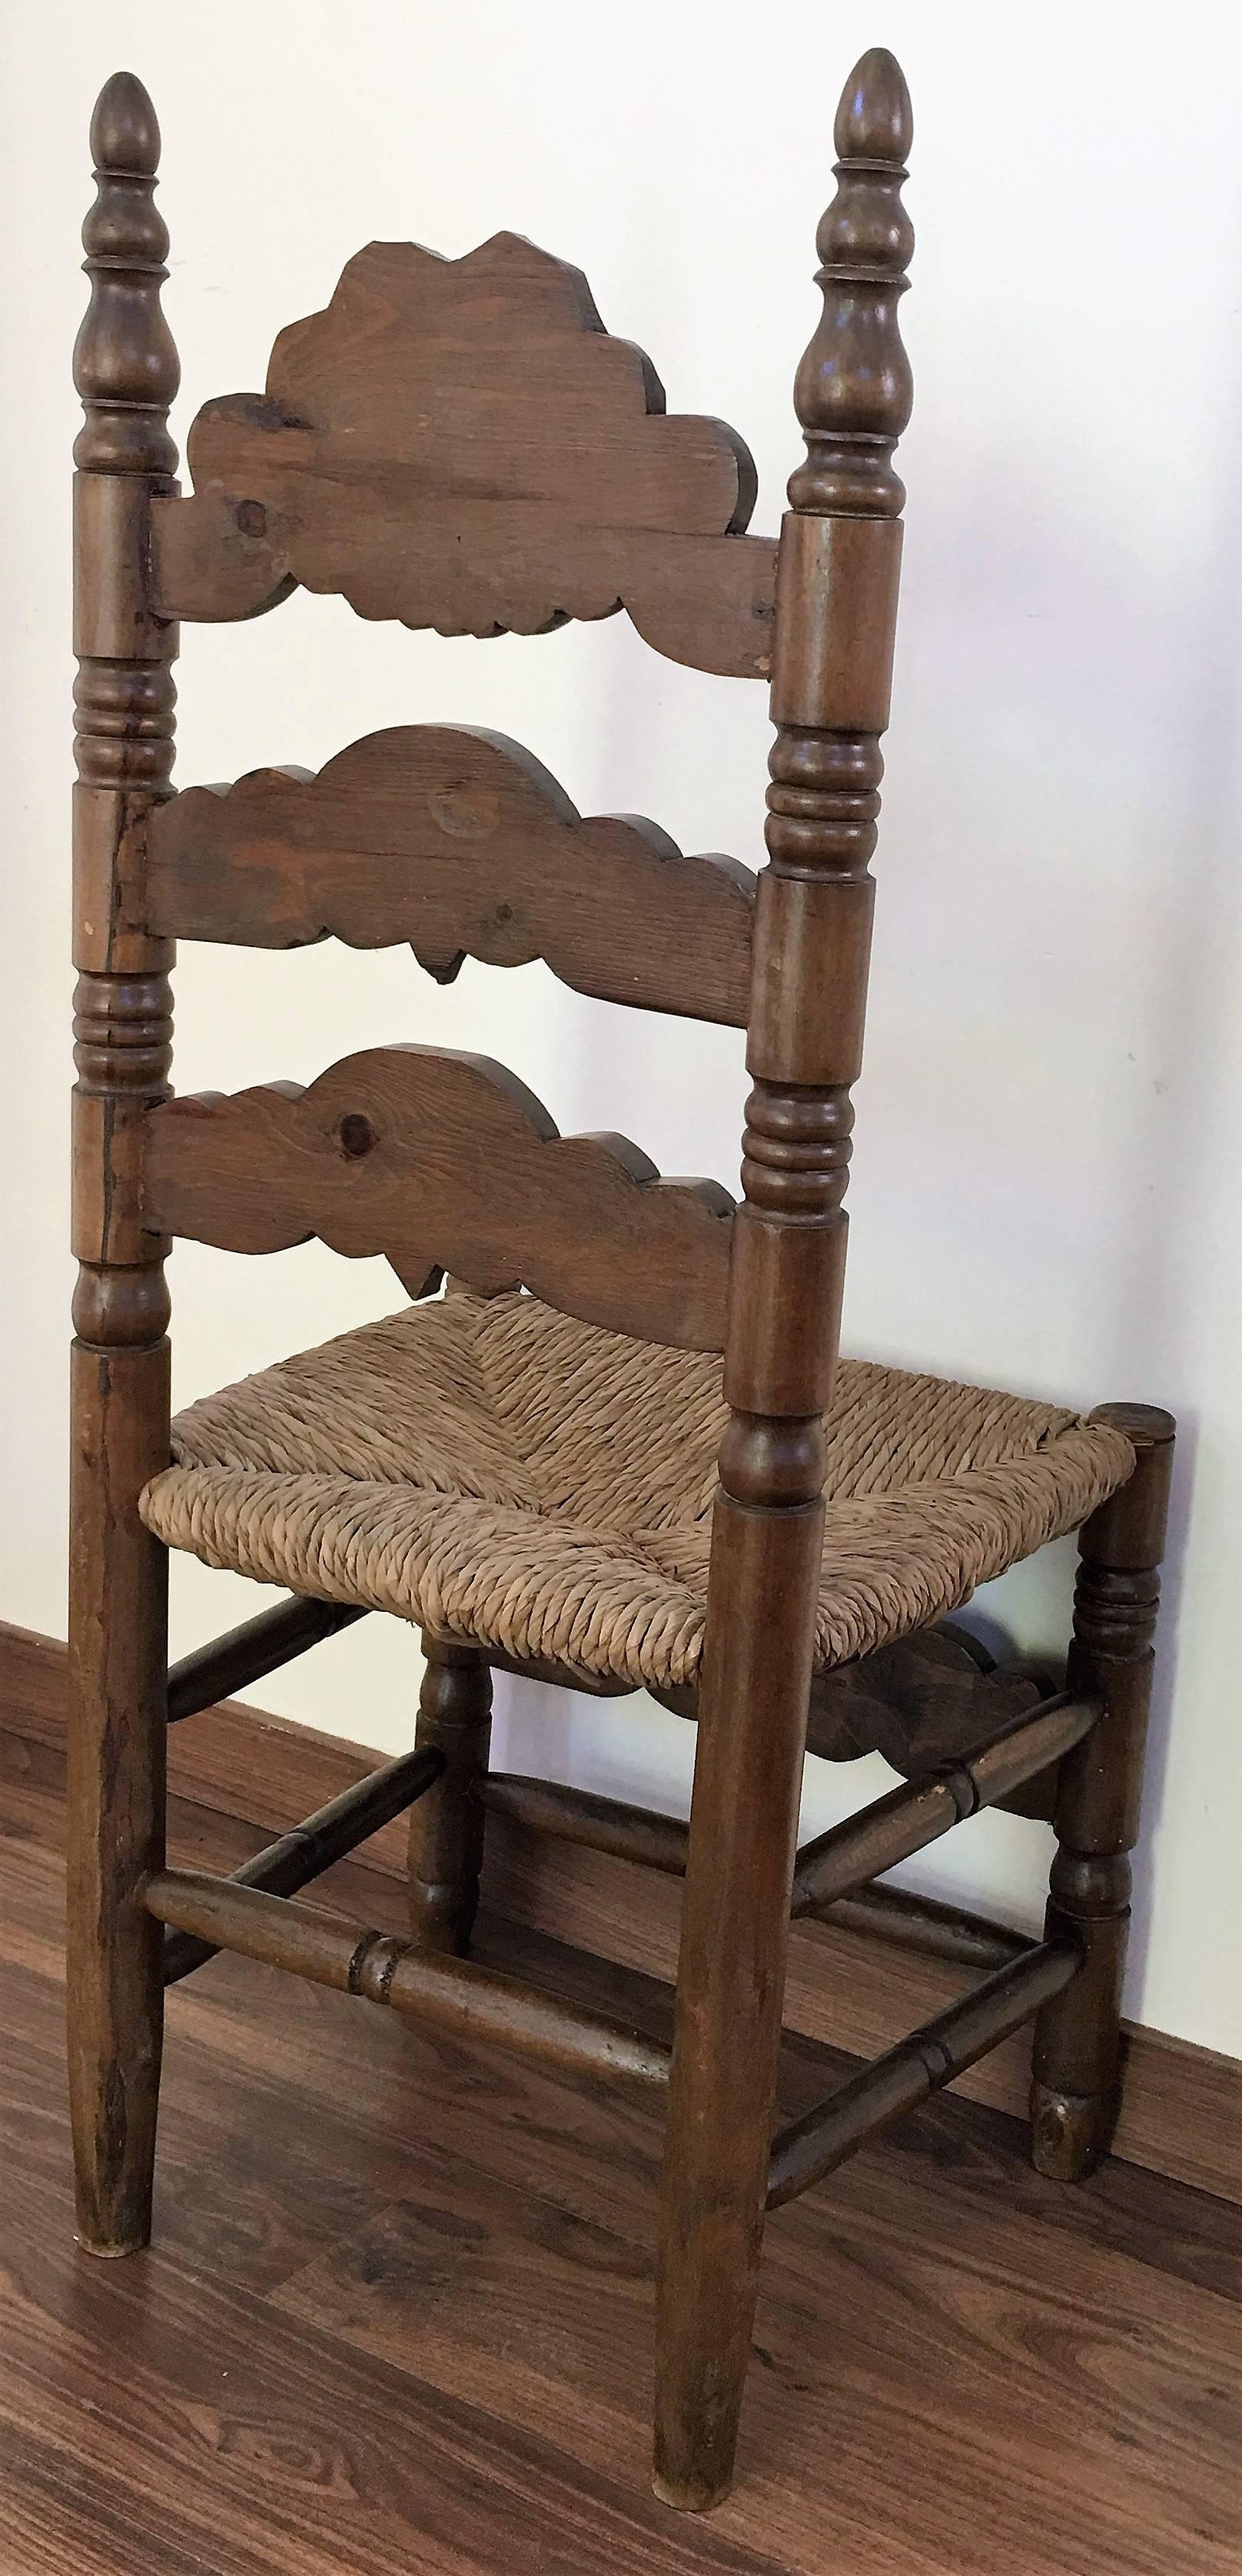 Set of Six Chairs, Turned and Carved Wood, with Straw Seat of the 20th Century 1